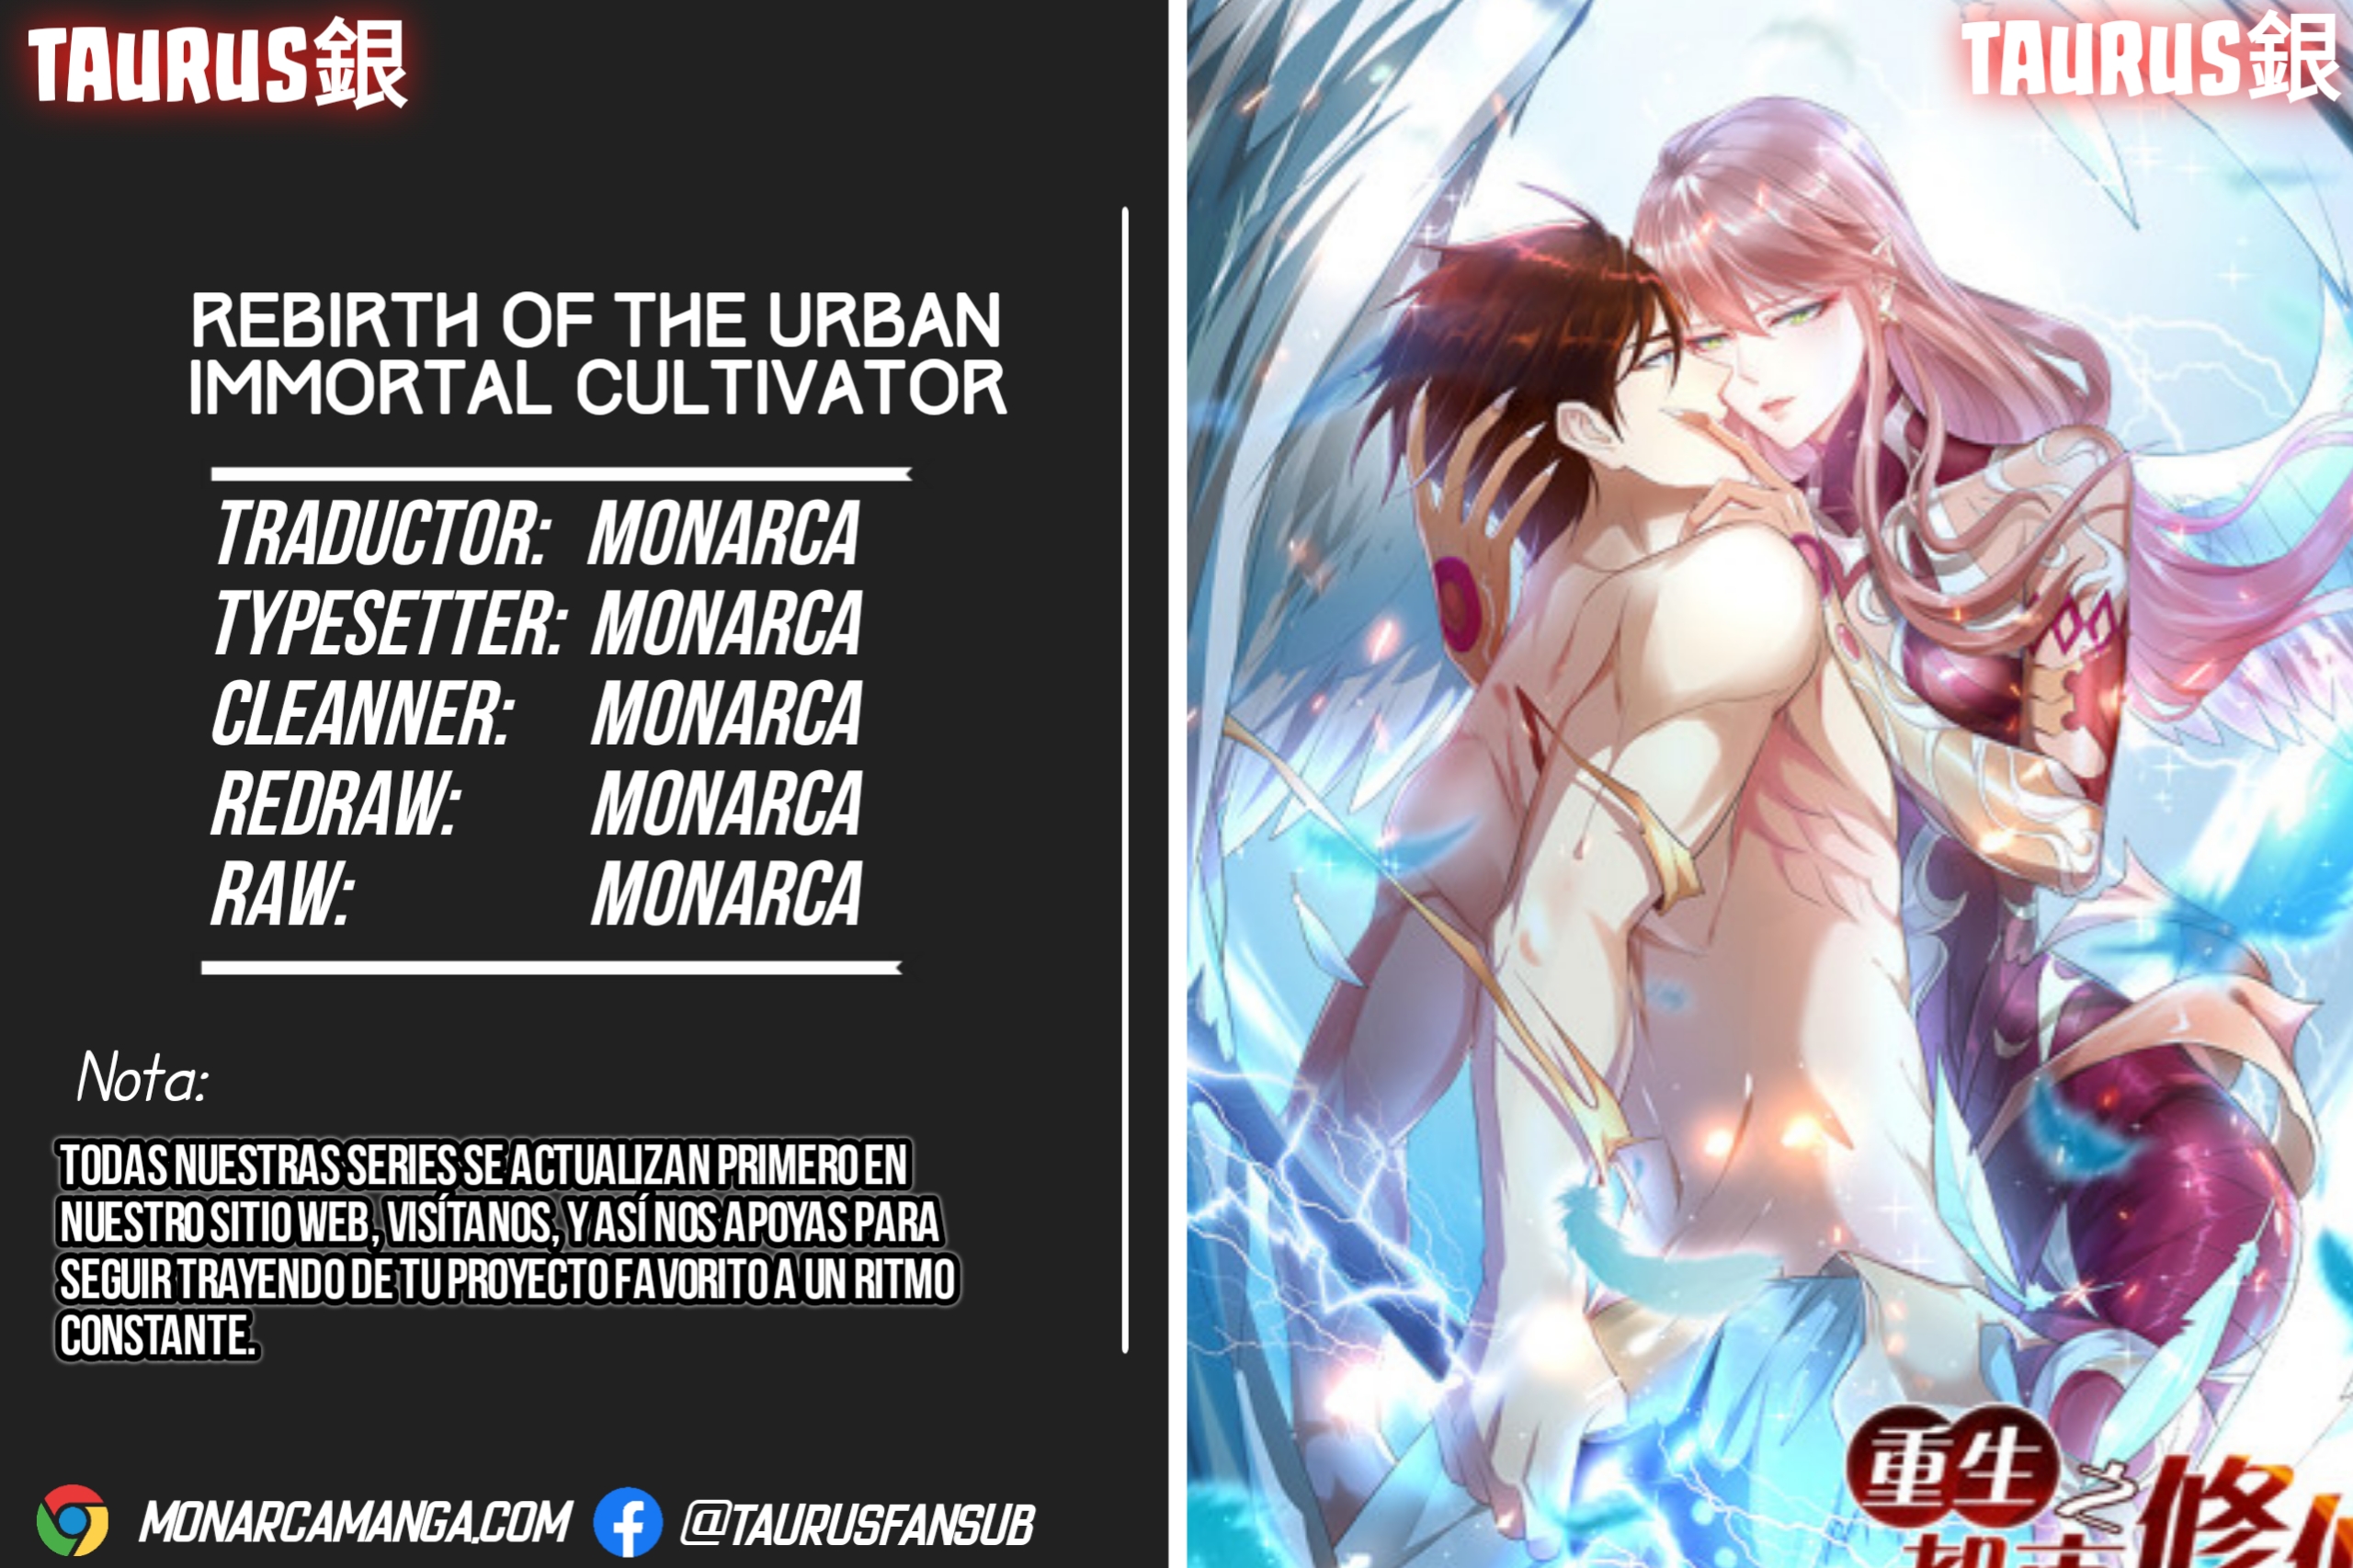 Manga Rebirth Of The Urban Immortal Cultivator Chapter 737 image number 5